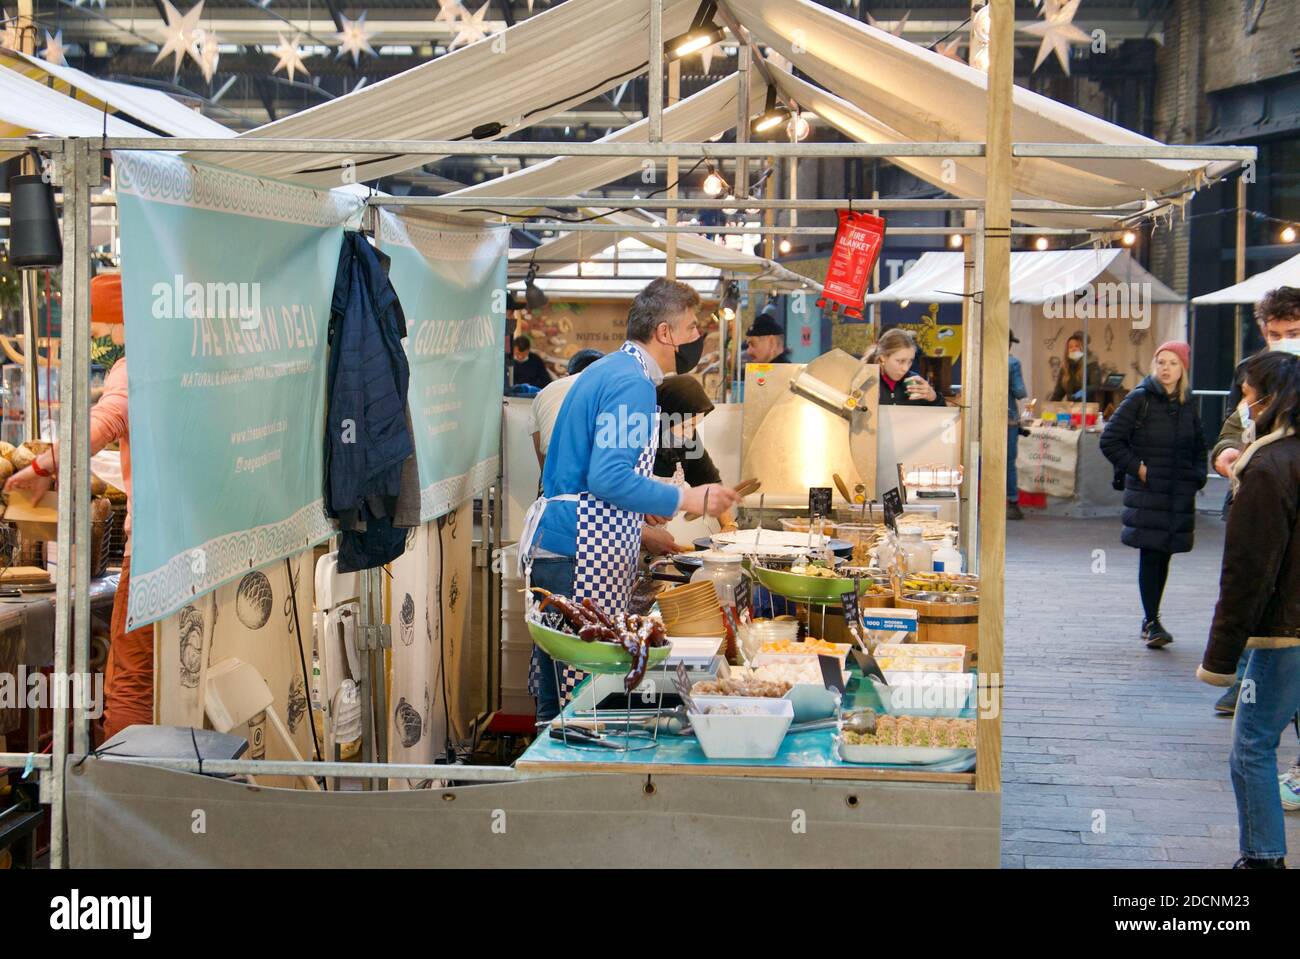 Man wearing face mask serving Turkish sweets and wraps at a Canopy Food Market in Coal Drops Yard, Kings Cross, London. Stock Photo